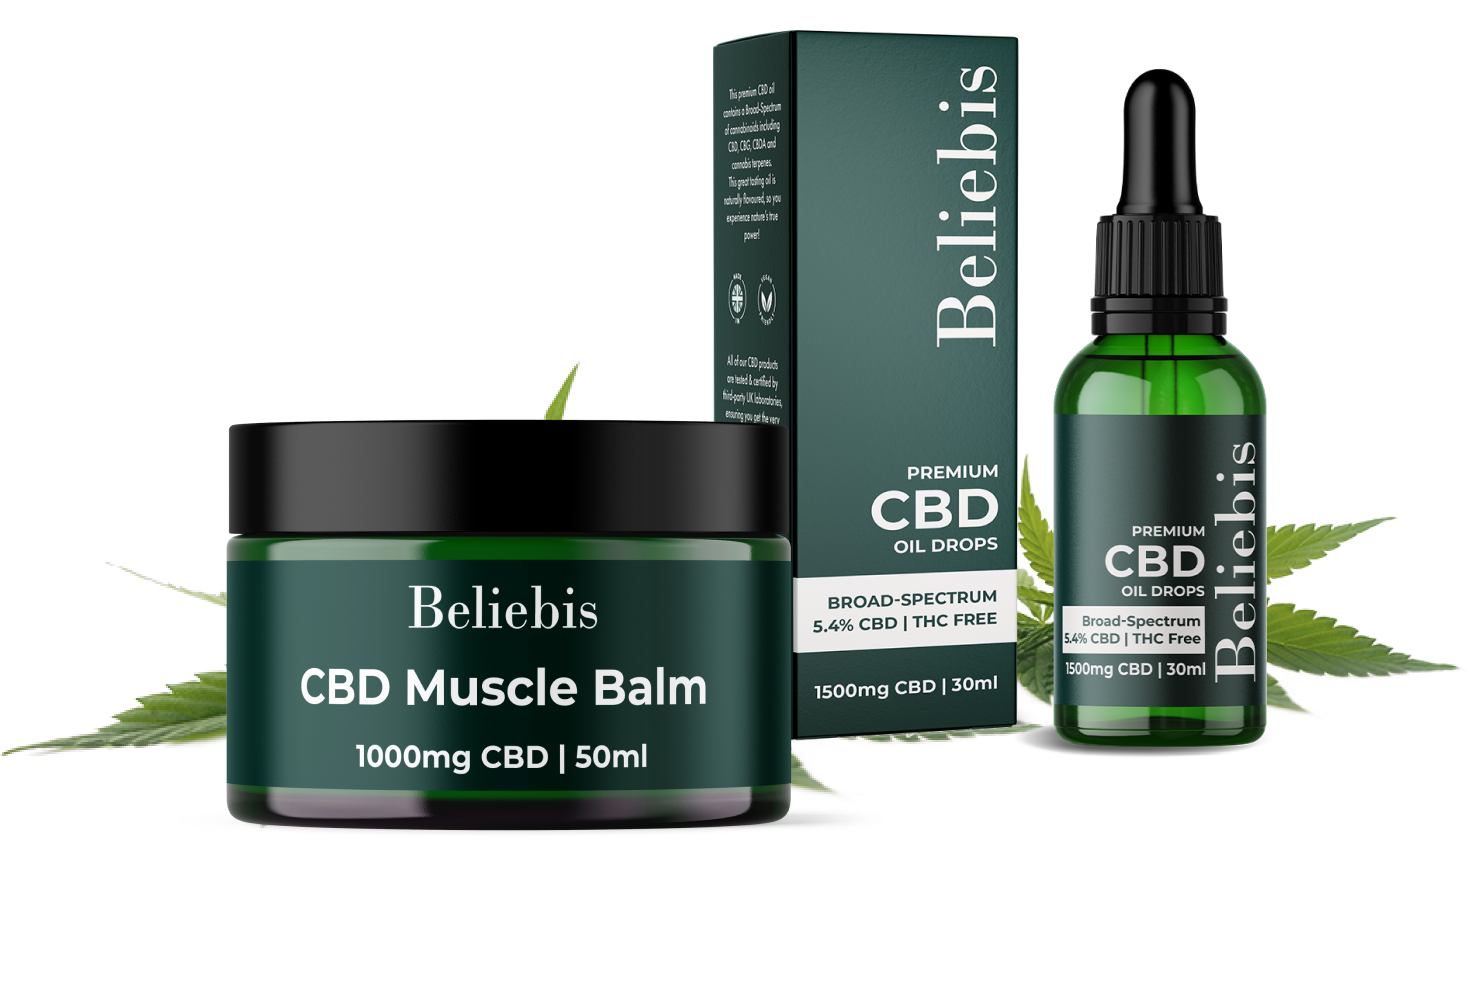 Two premium CBD Shop products in front of hemp leaves, a CBD muscle balm and a 1500mg CBD oil.